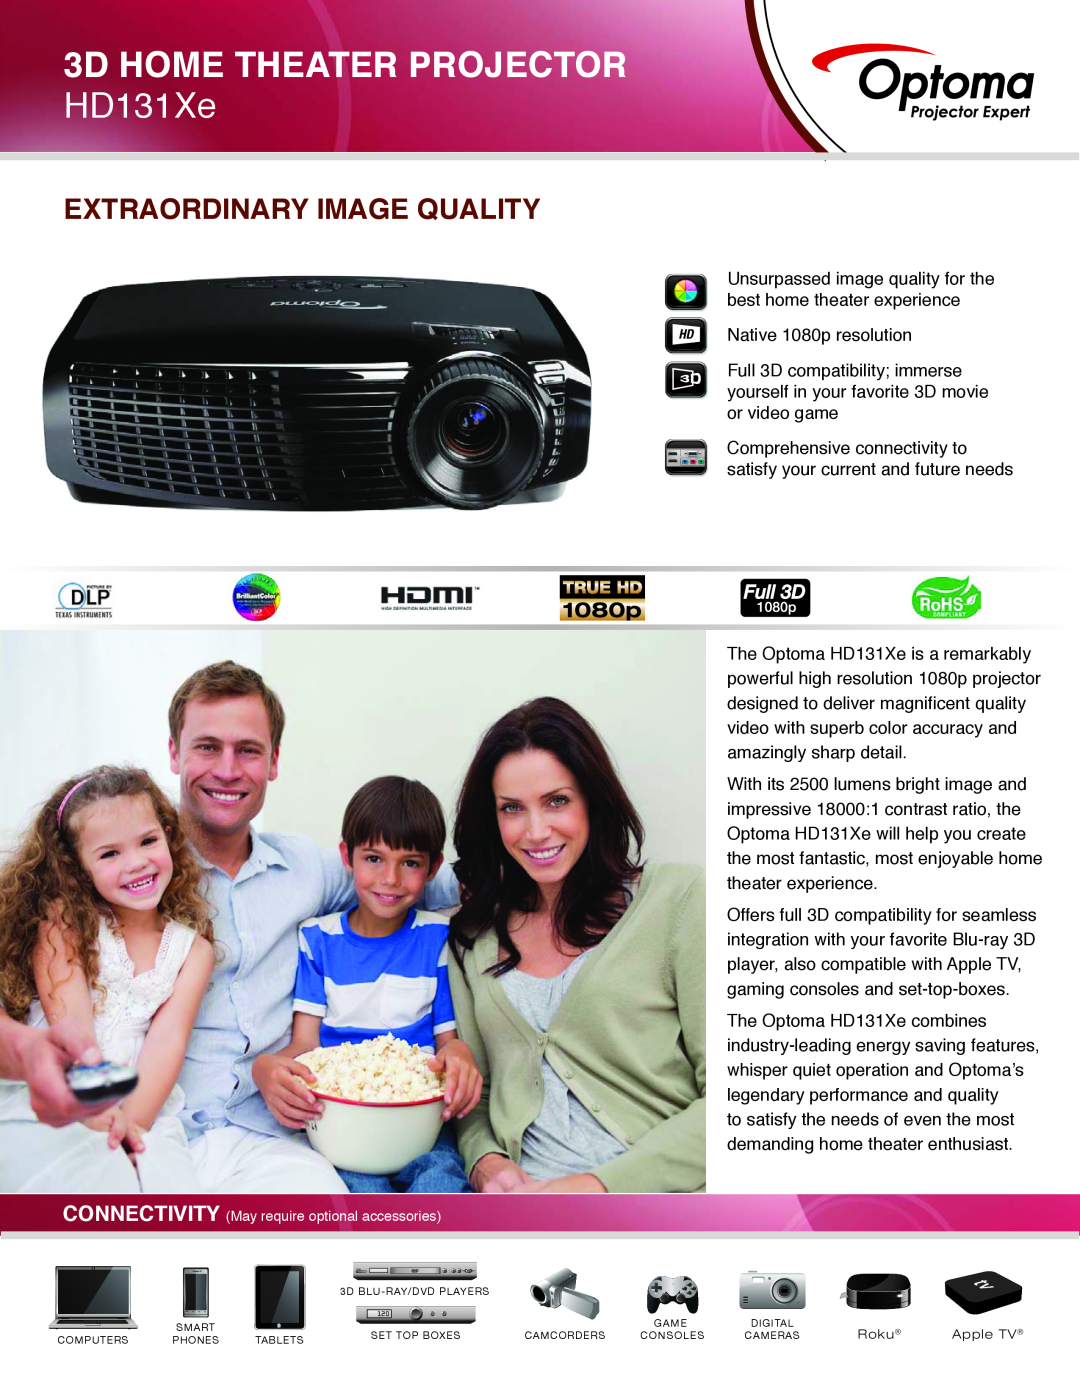 Optima Company HD131XE manual 3D HOME THEATER PROJECTOR, HD131Xe, Extraordinary Image Quality, Native 1080p resolution 